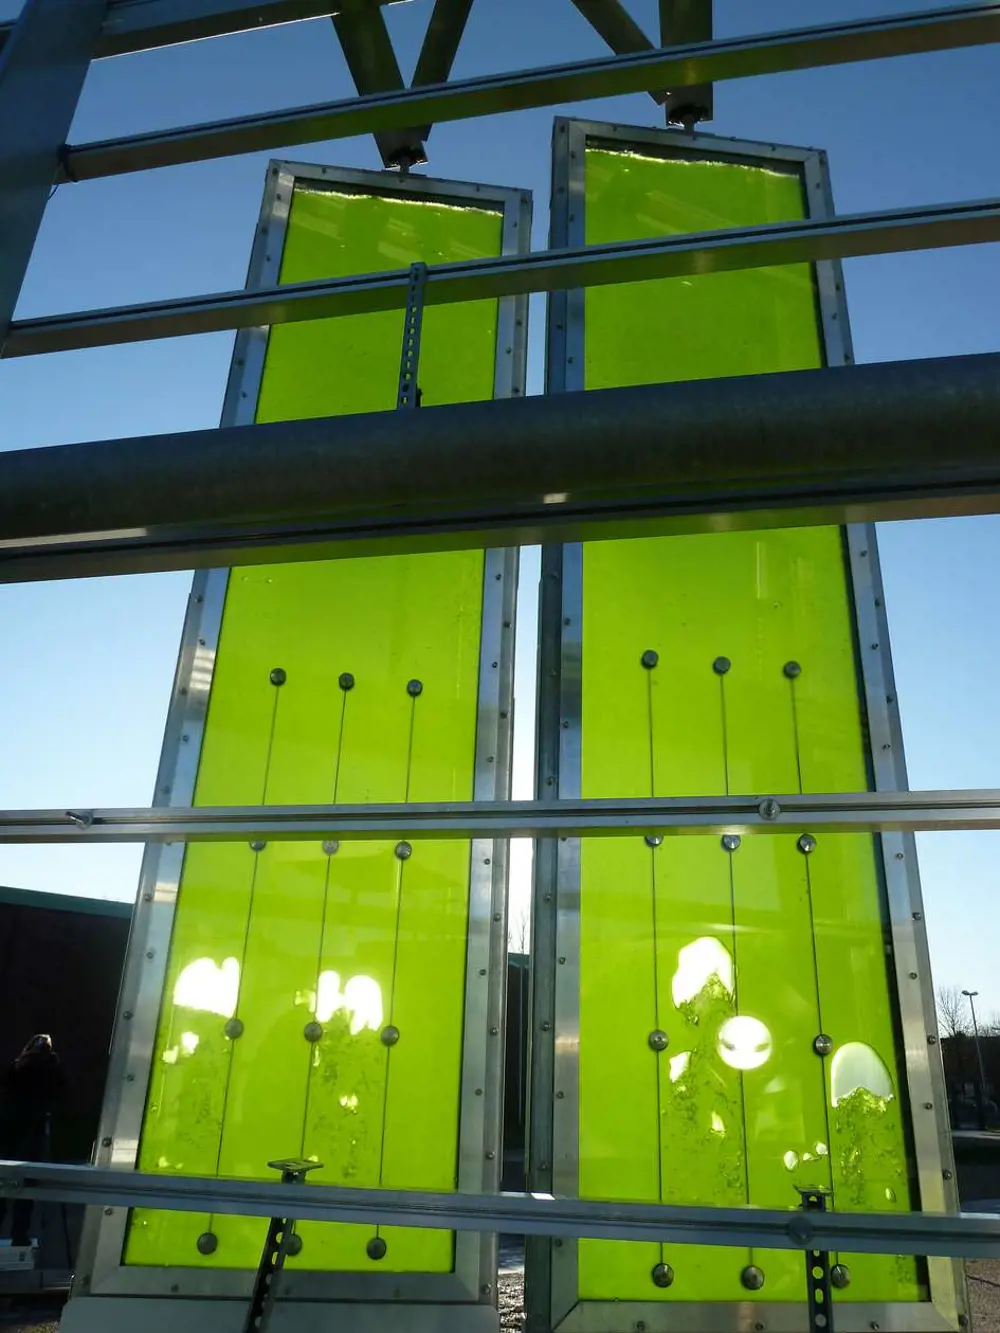 A transparent cluster of rectangular panels containing green liquid with bubbles running through it.